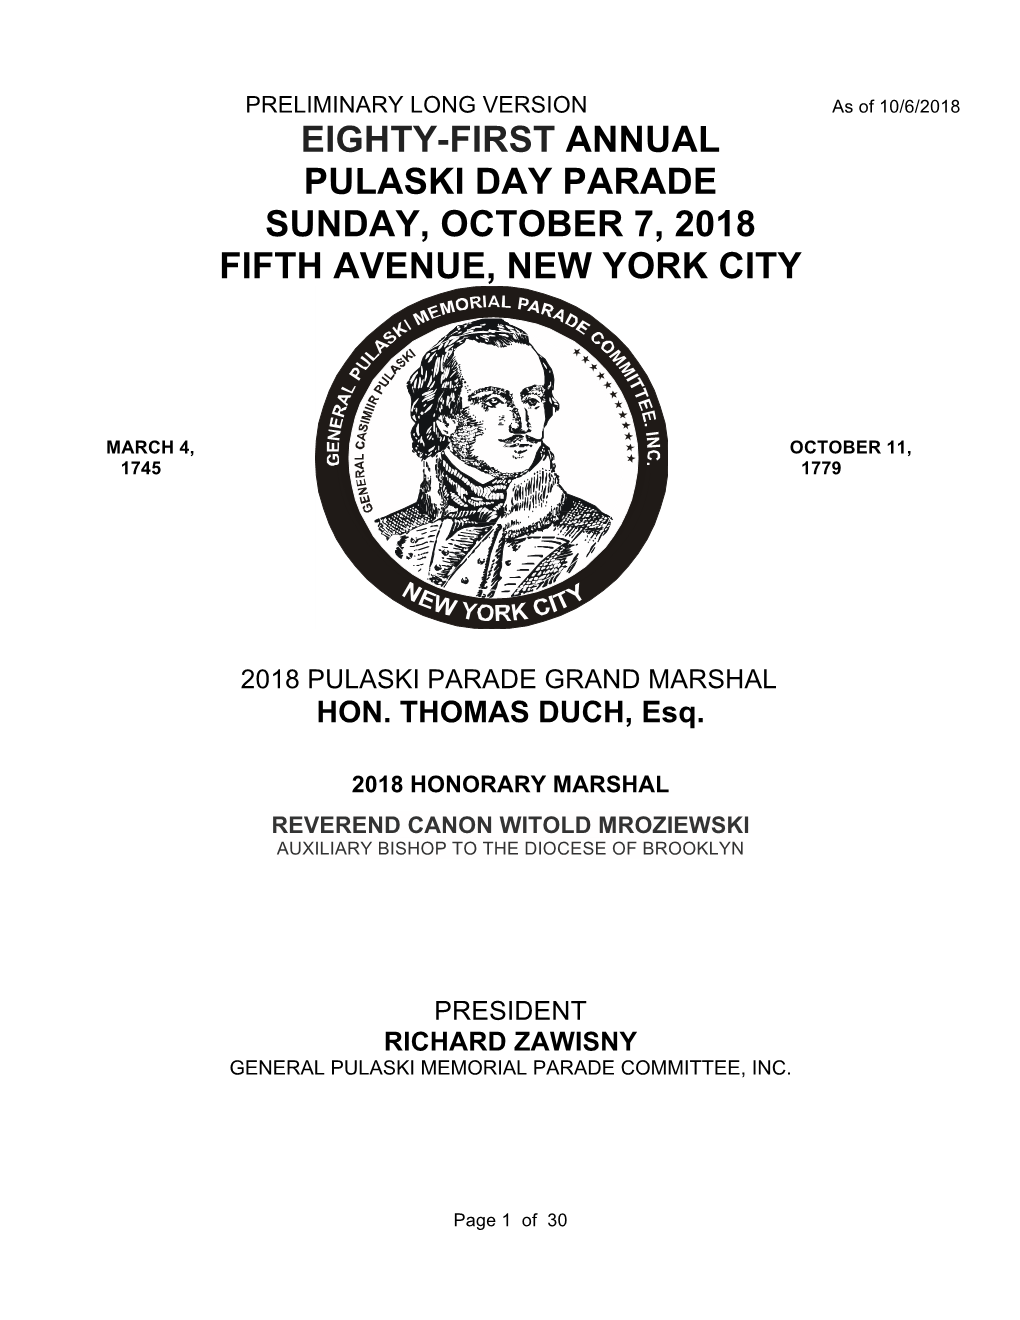 Eighty-First Annual Pulaski Day Parade Sunday, October 7, 2018 Fifth Avenue, New York City